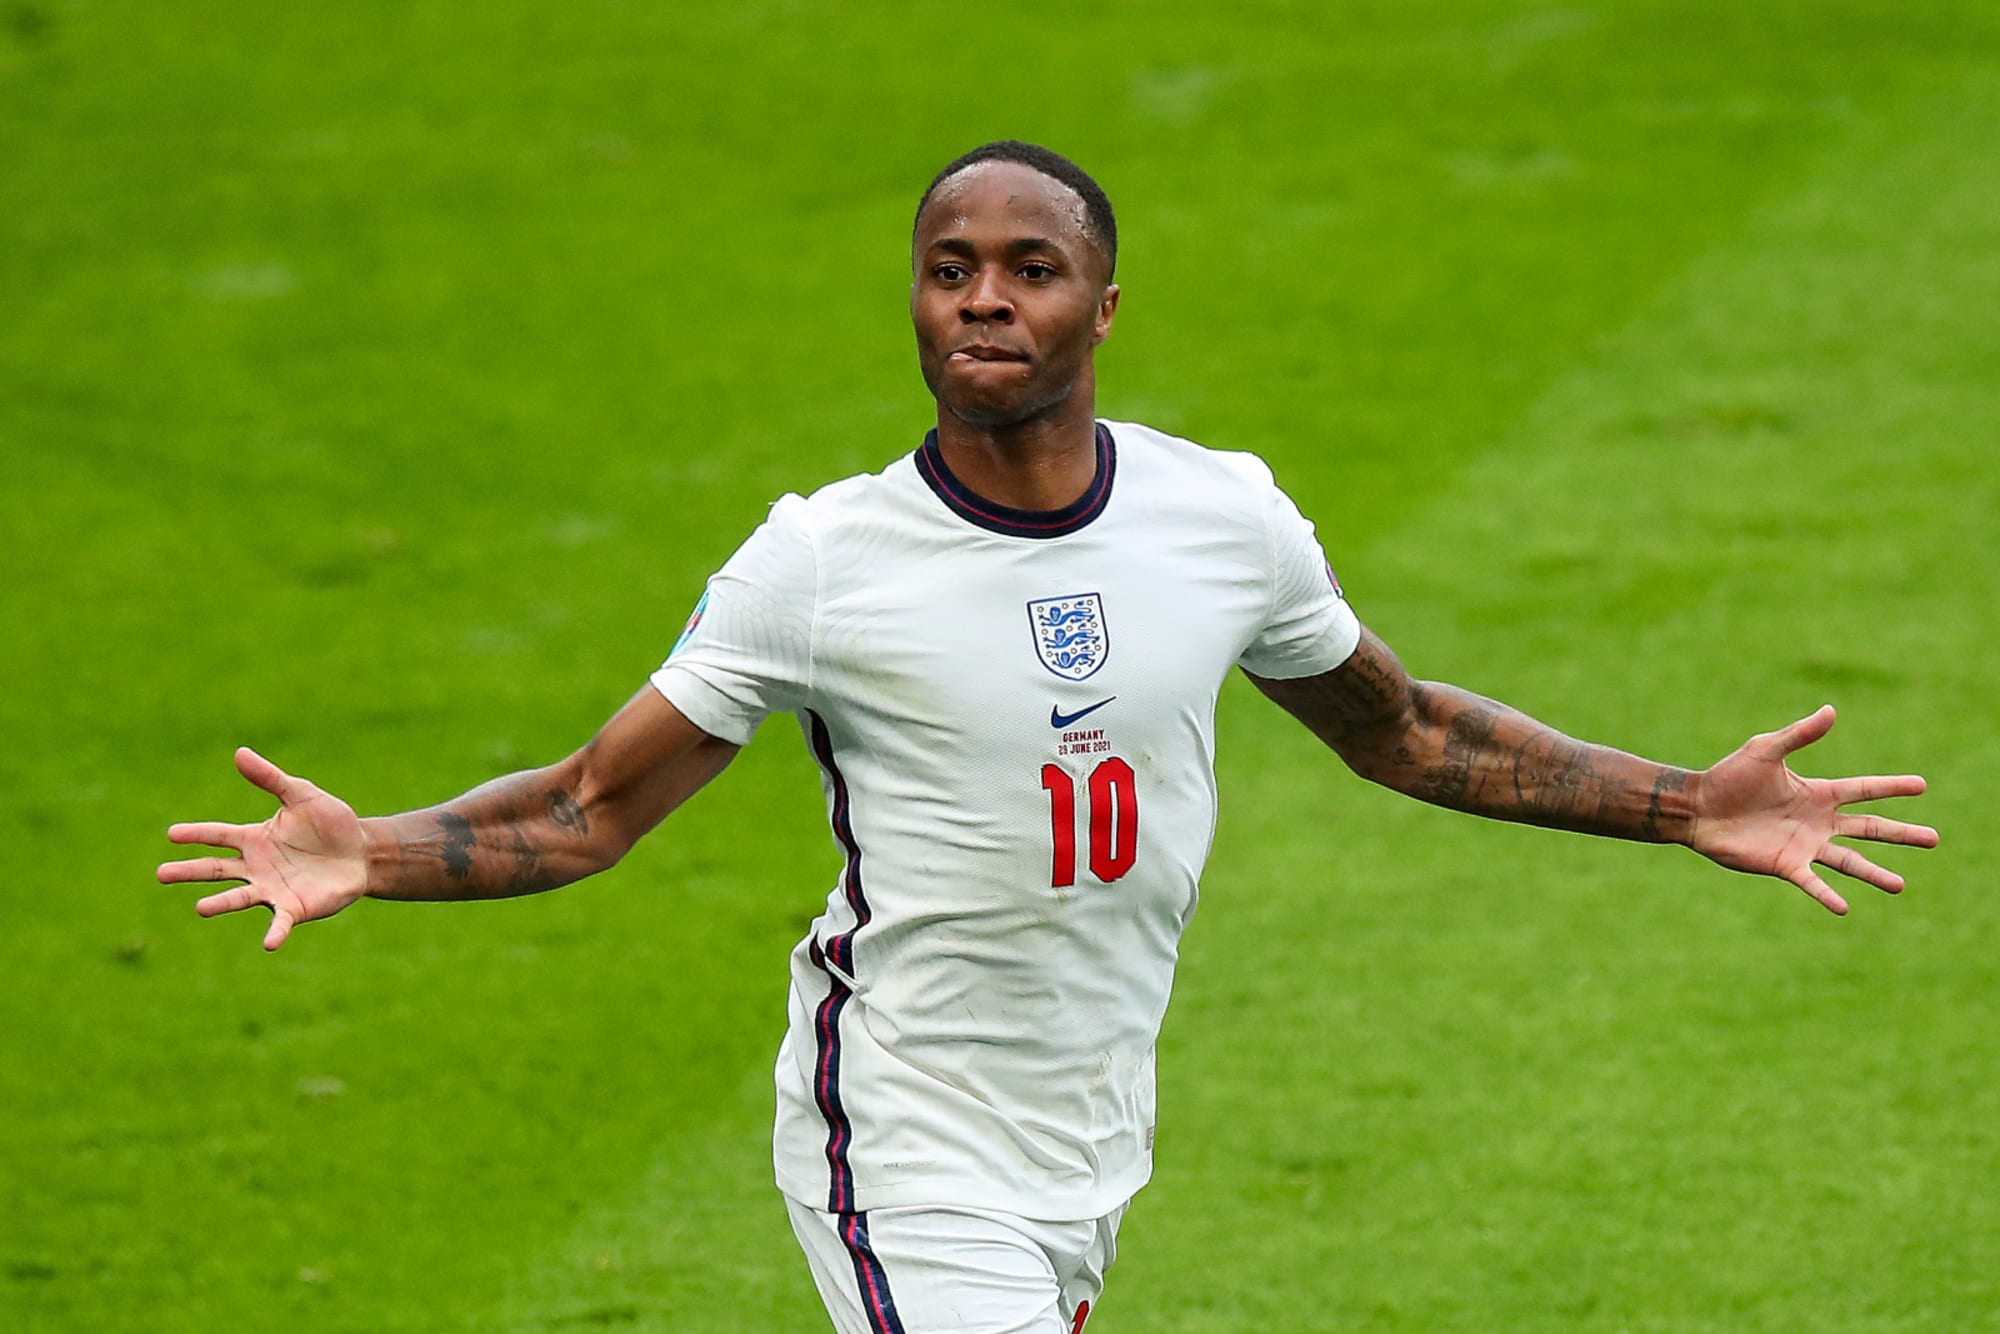 Arsenal fan clamour for Raheem Sterling signing grows